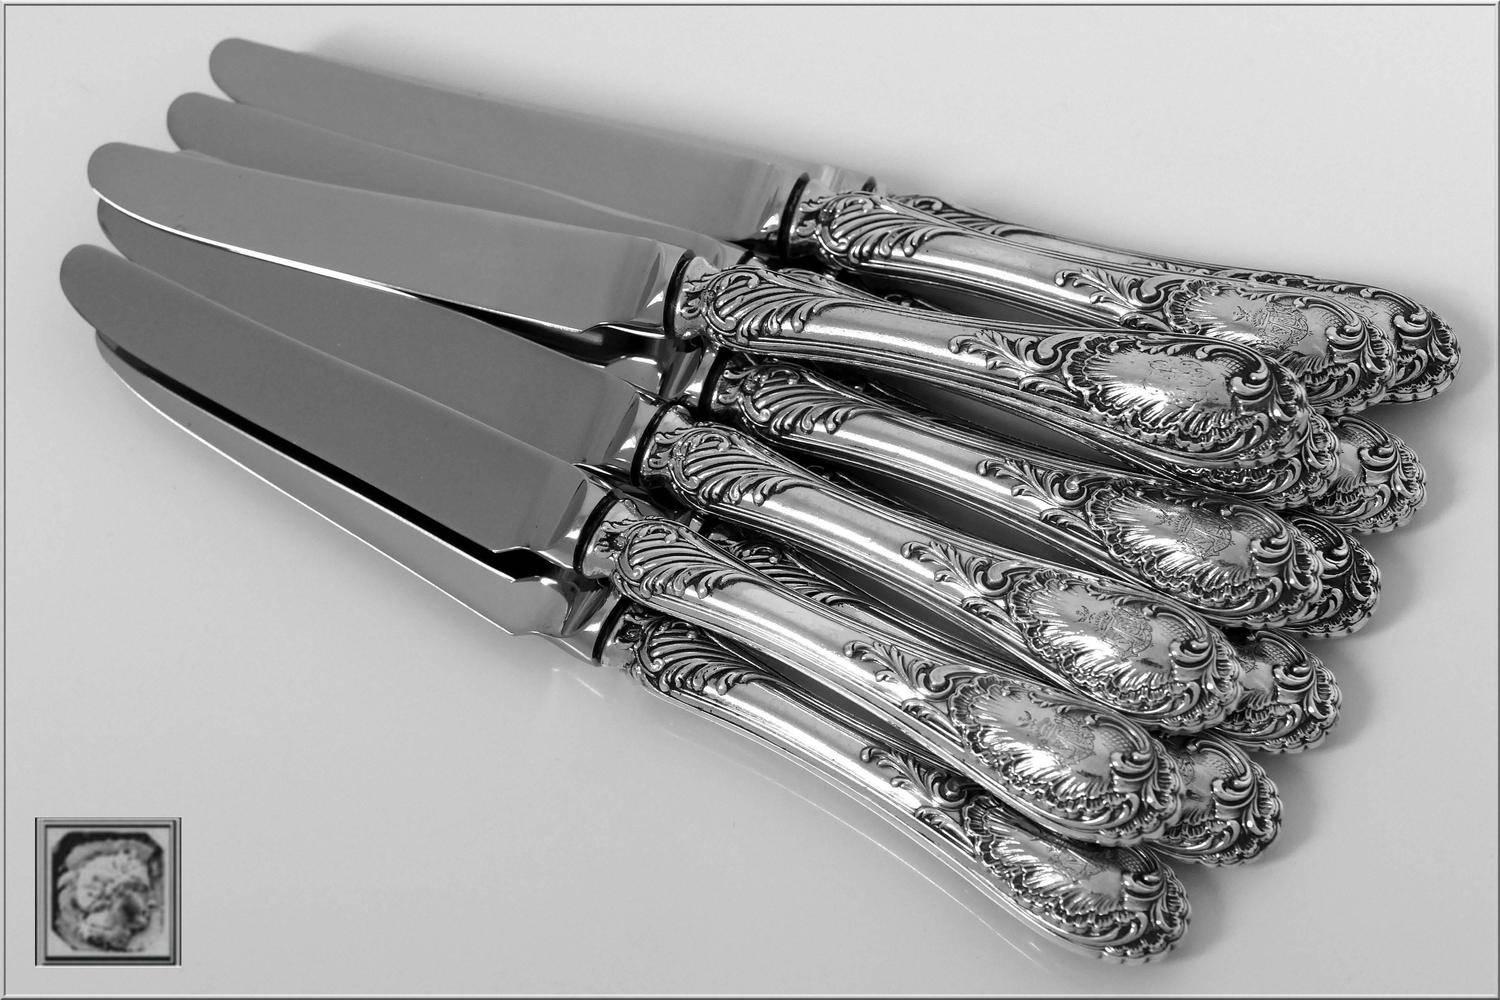 Puiforcat French Sterling Silver dessert knife set 12 pc, new stainless blades.

Rococo handles have fantastic decoration in the Rococo style. Model called 